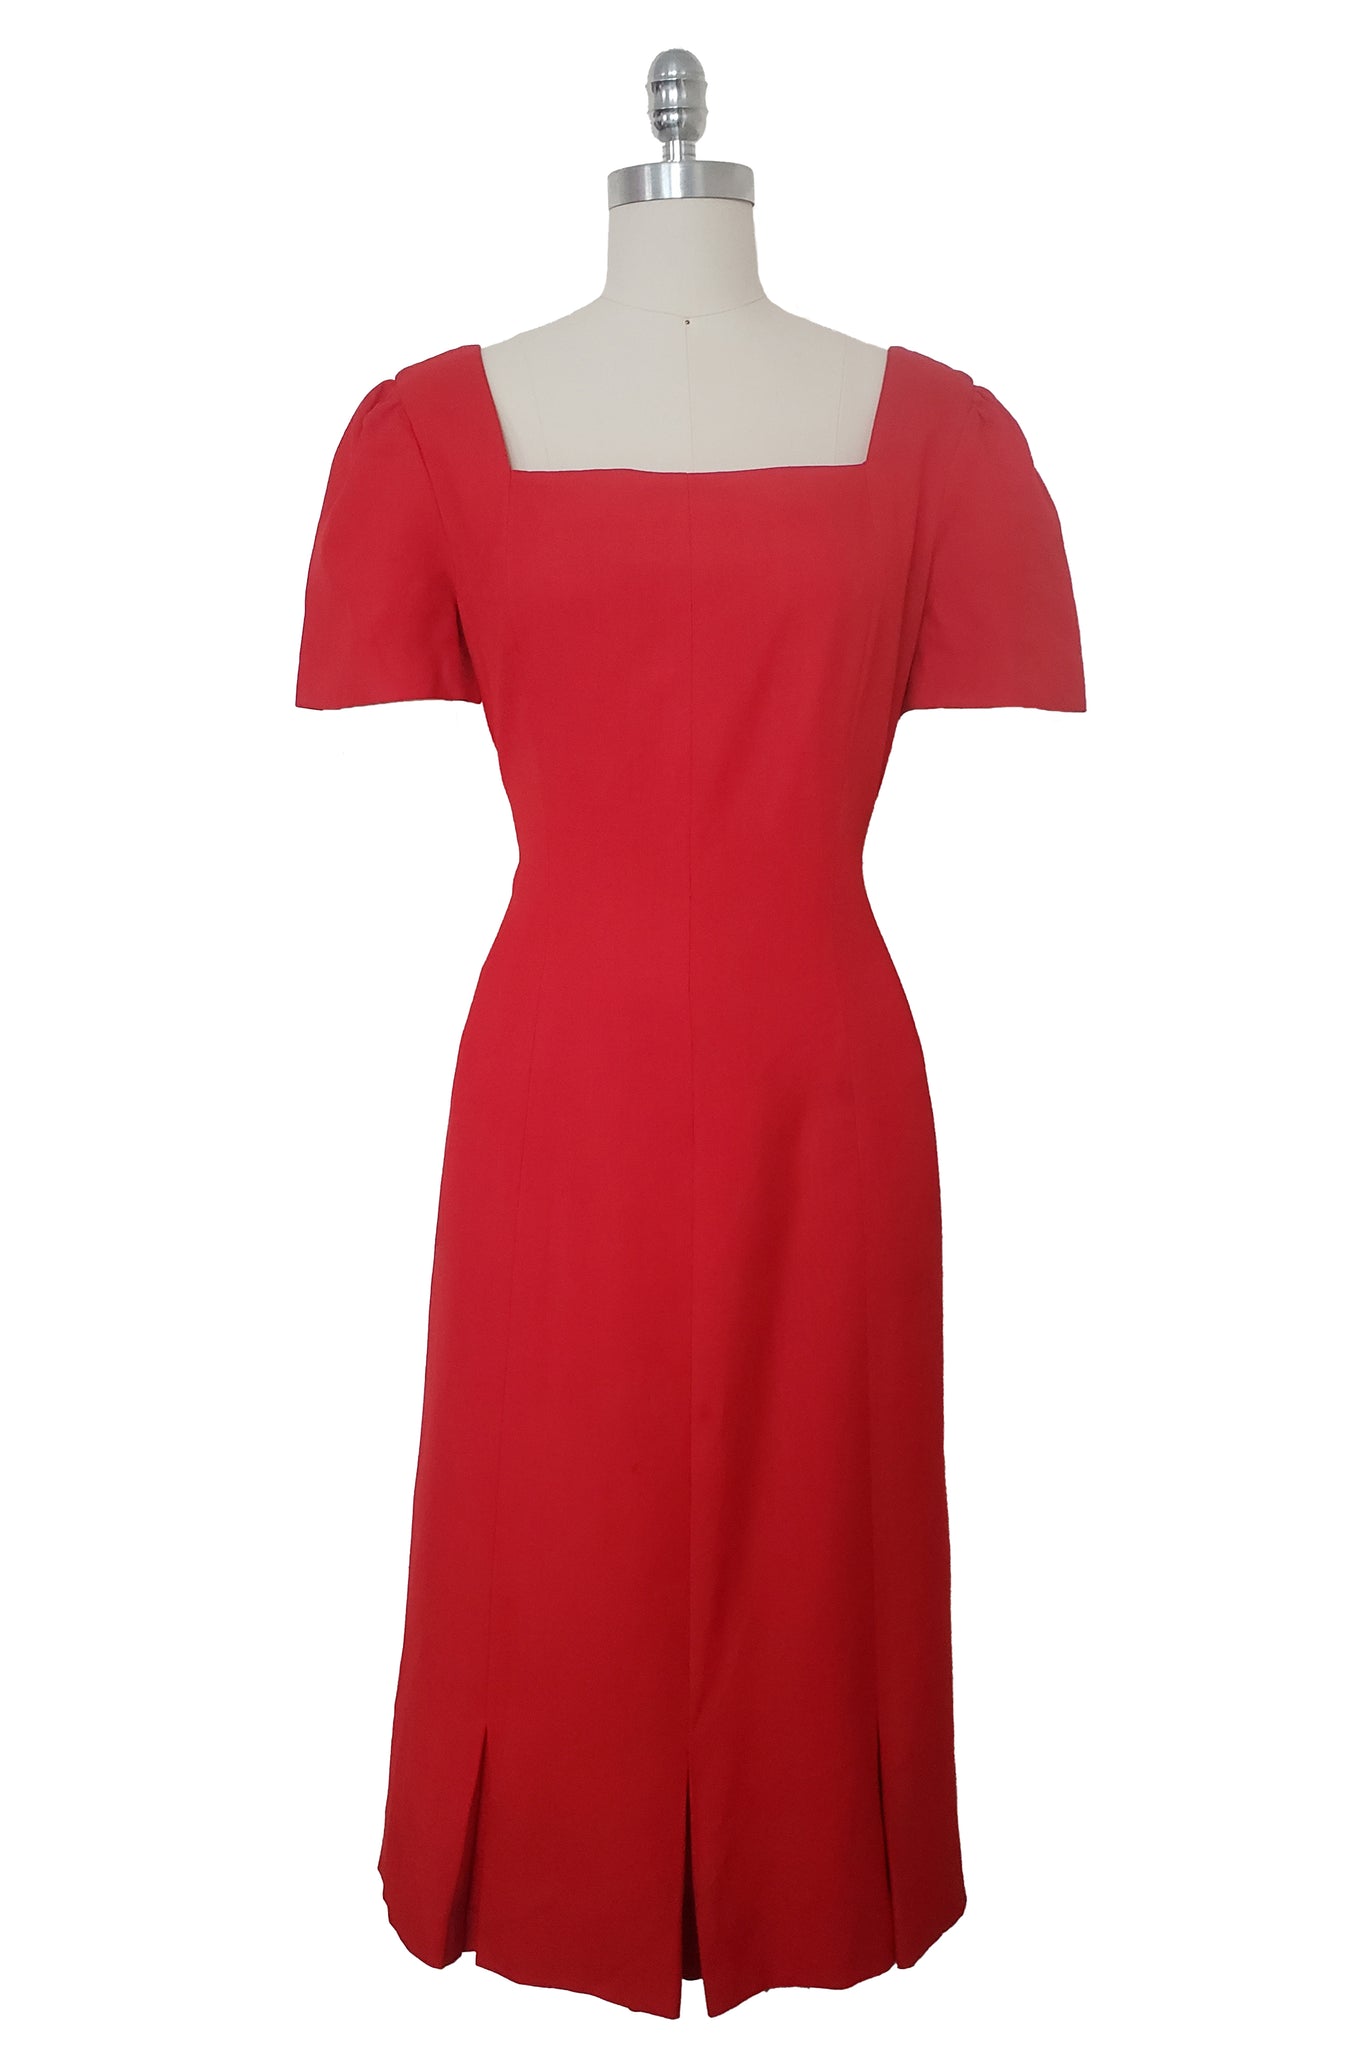 1990s Vintage Red Square Neck Dress by Adele Simpson, Small to Medium